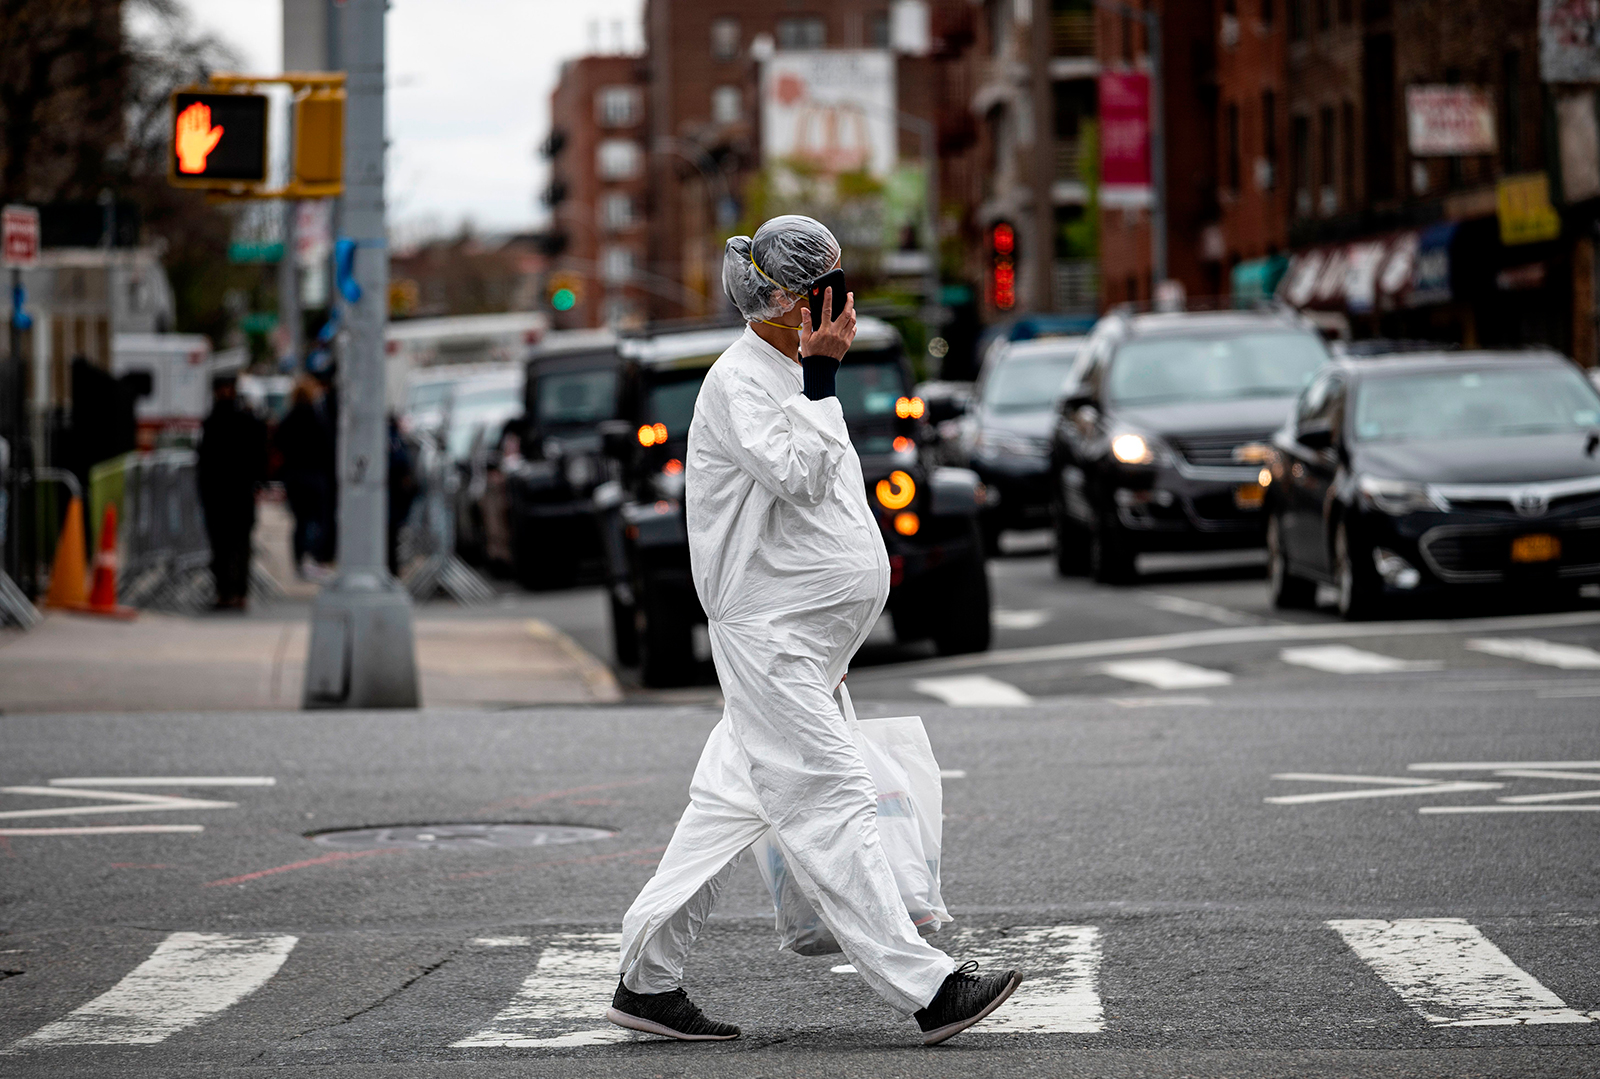 A pregnant woman wearing a hazmat suit and a mask walks in the streets in the Elmhurst neighborhood of Queens on April 27, in New York City.